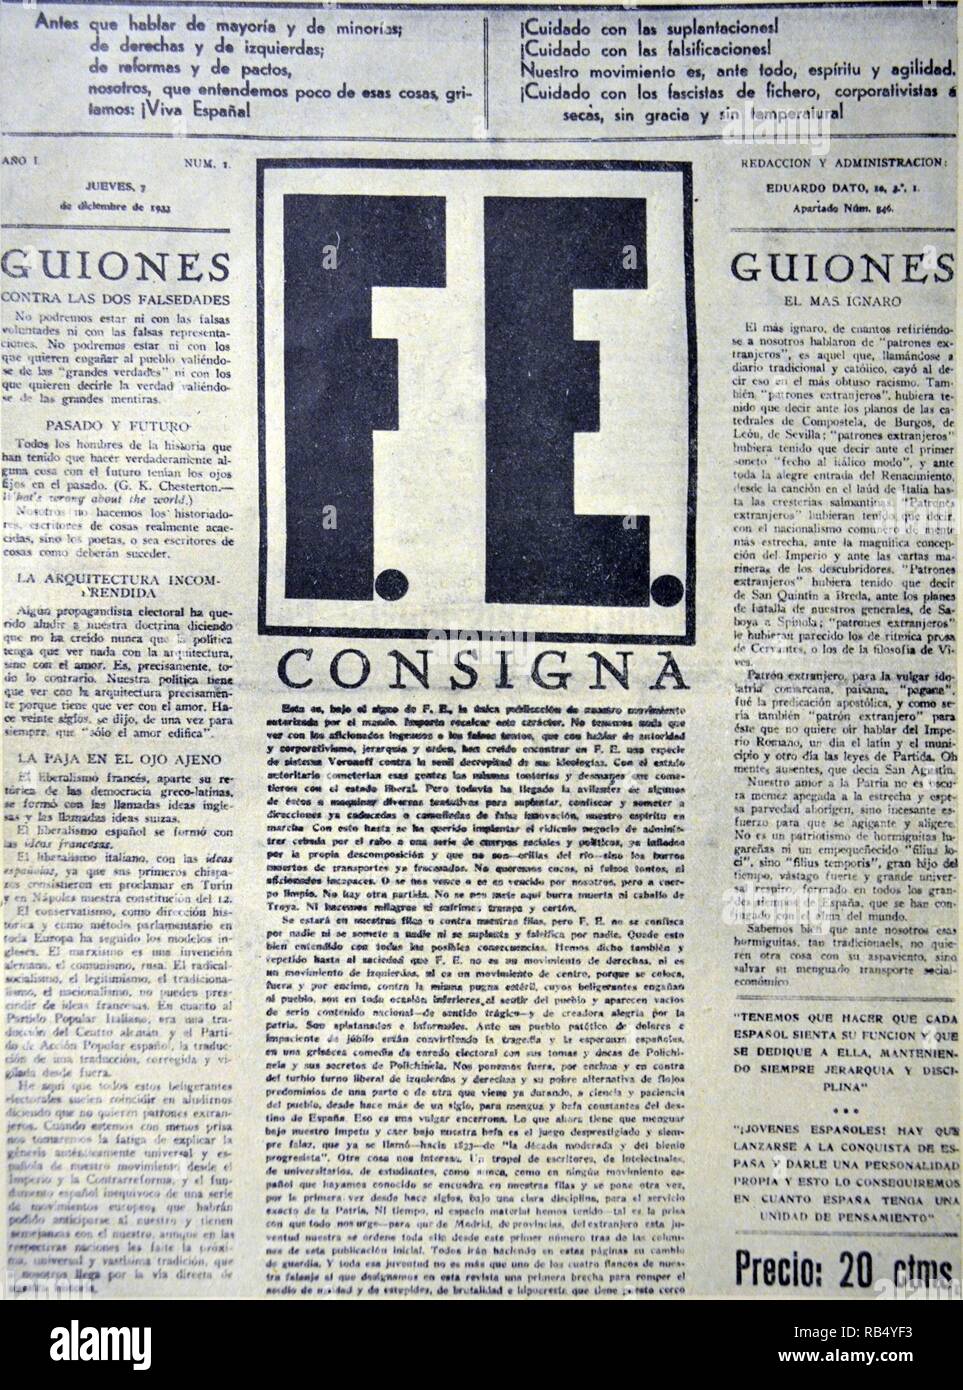 Spanish civil war: fascist Falange FE Newsletter,, (Falange EspaA+ola de las JONS) - created by a merger in 1934 of two fascist organisations, Primo de Rivera's Falange (Phalanx), founded in 1933, and Ramiro Ledesma's Juntas de Ofensiva Nacional-Sindicalista (Assemblies of National-Syndicalist Offensive), founded in 1931. It became a mass movement when it was joined by members of AcciA3n Popular and by AcciA3n CatA3lica, led by RamA3n Serrano SA0A+er. Stock Photo